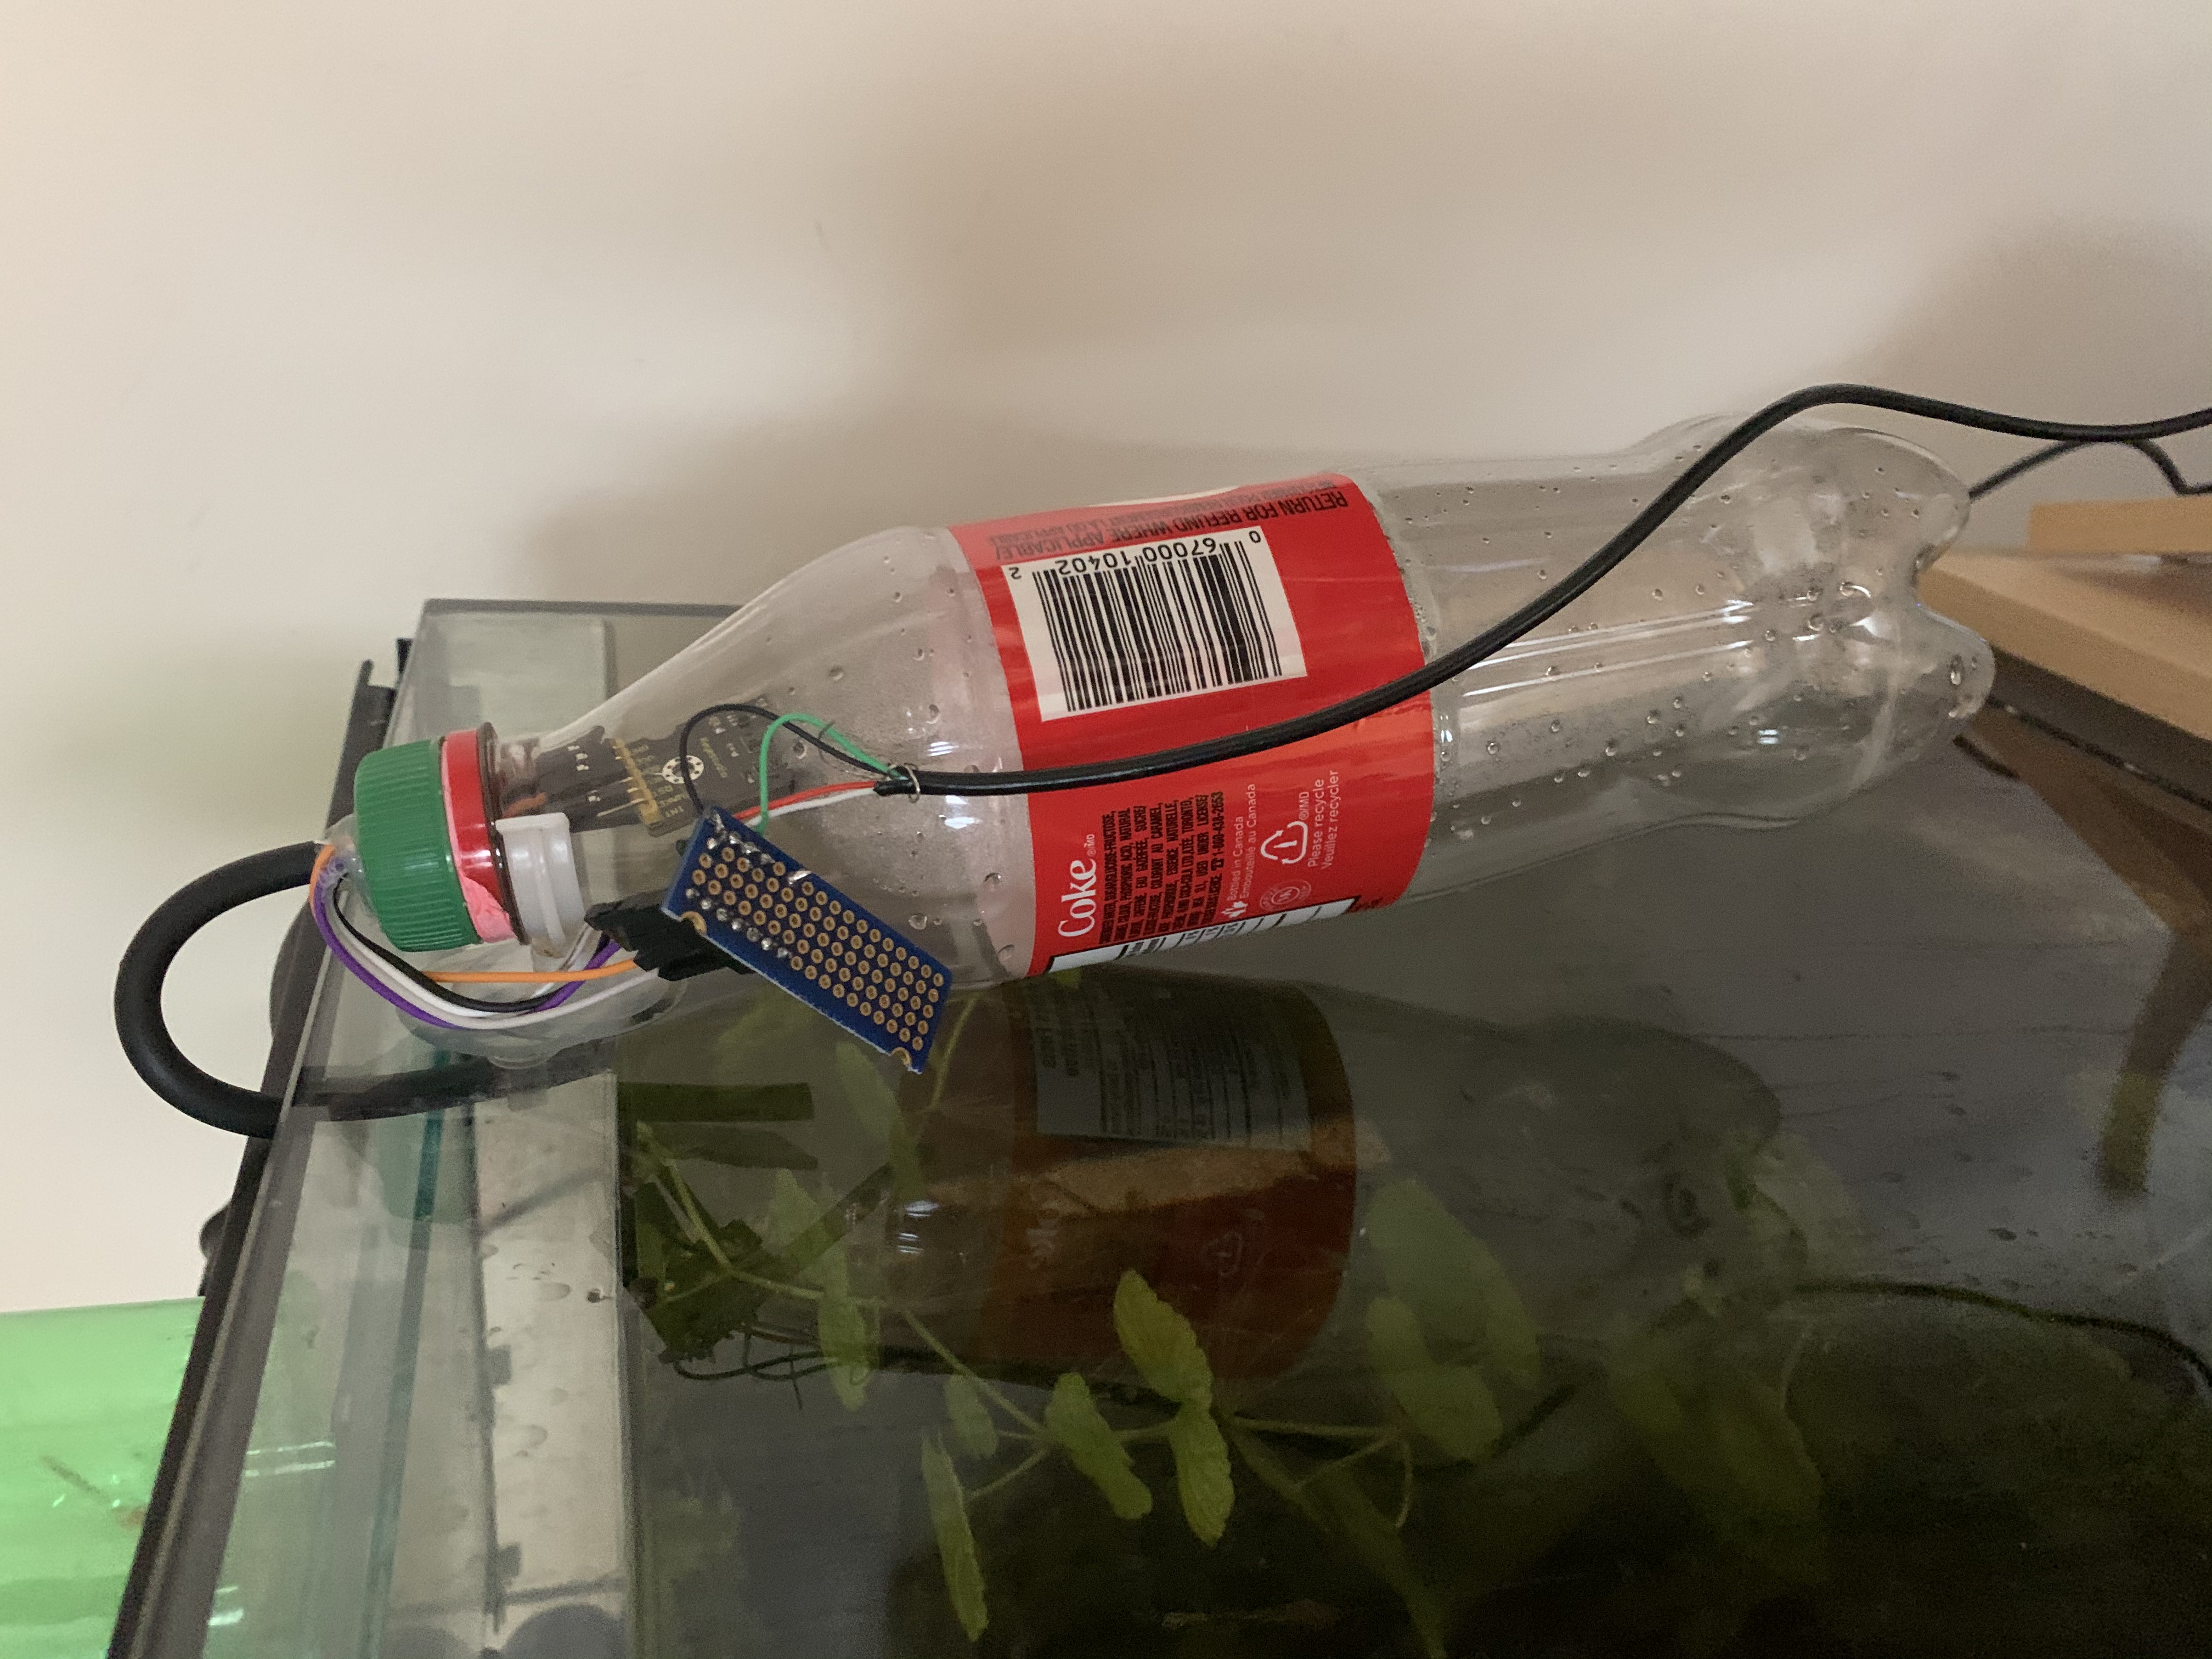 The bottle is in the outside of the tank, and the tubing leads from the coke bottle, to the tank.